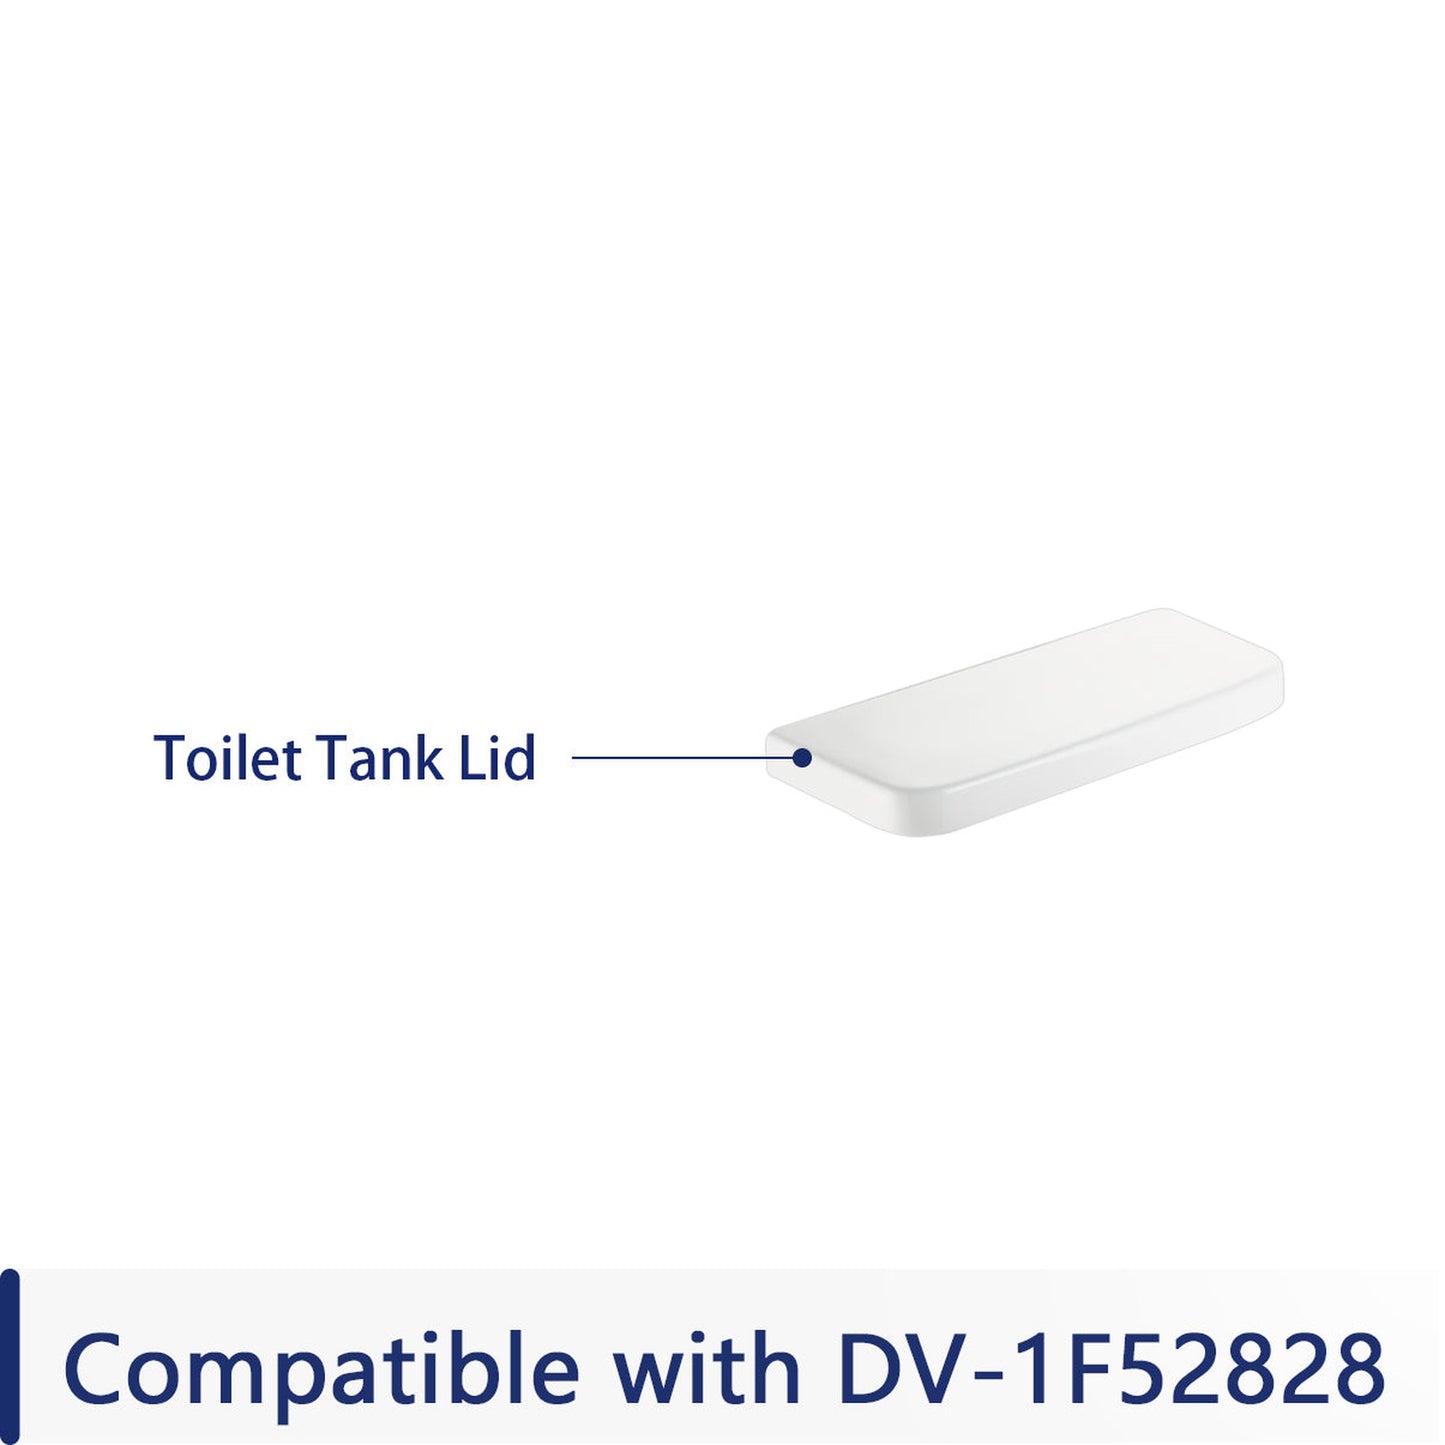 DeerValley Tank Lid (Not with a flush button, compatible with DV-1F52828)